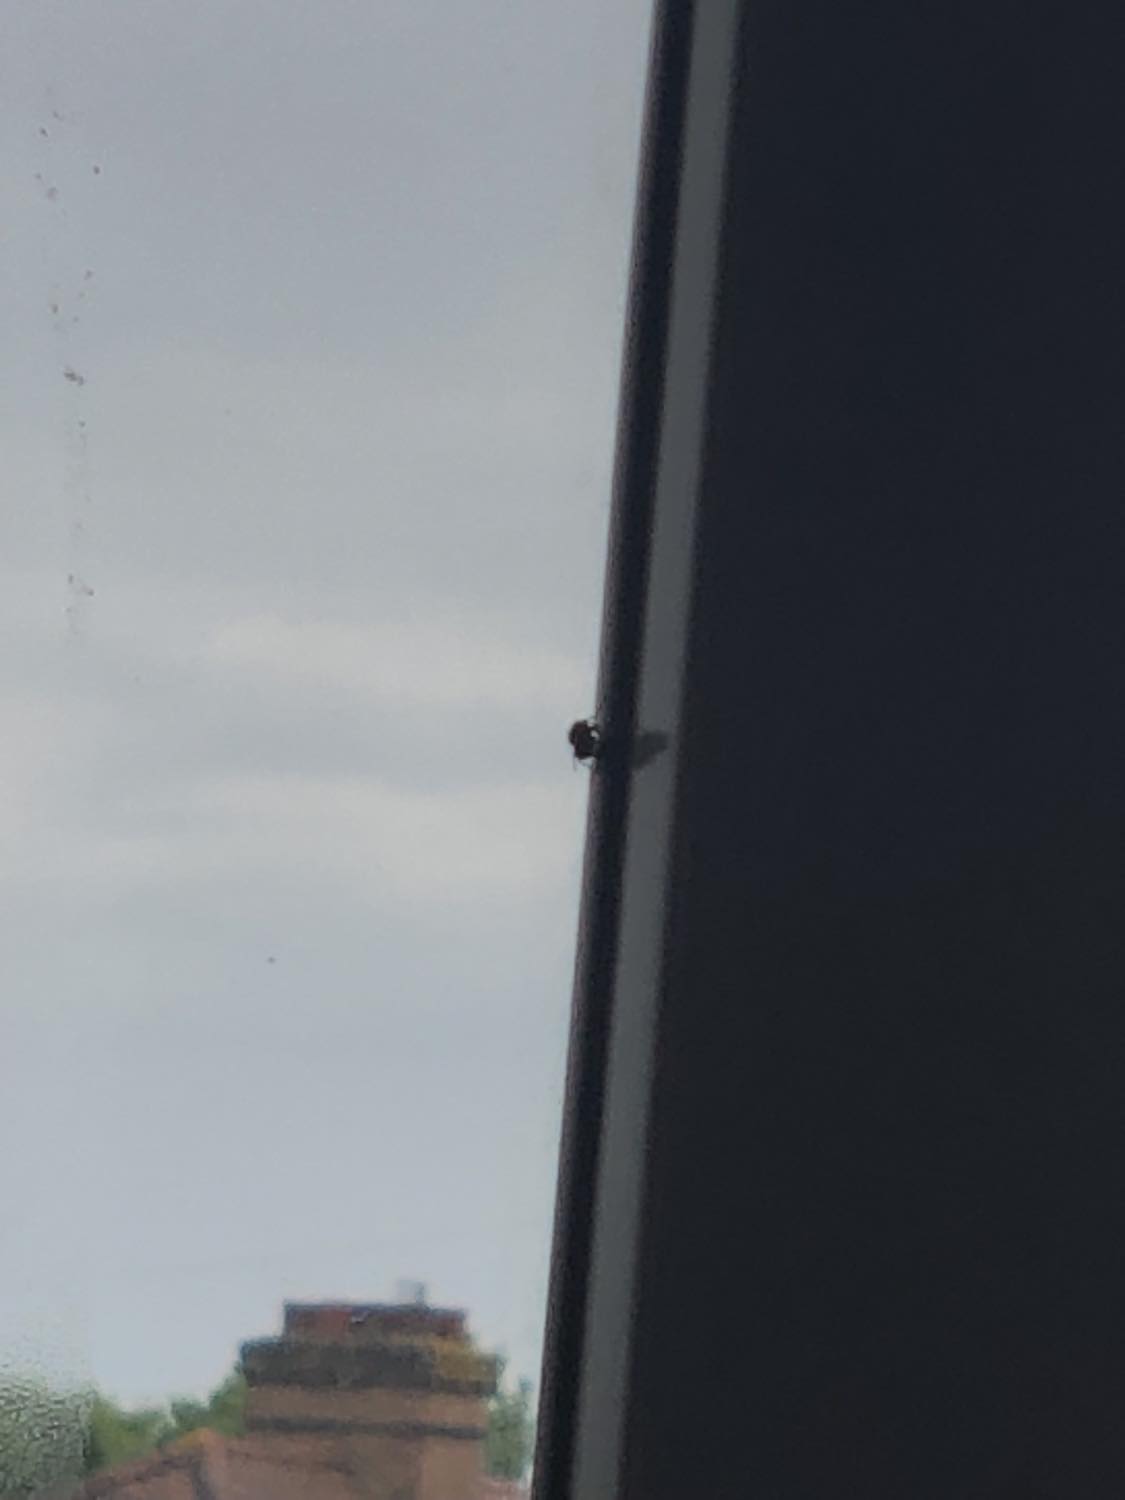 Lil fly friend sitting on the edge of the window, watching us dance with the other fly in the room